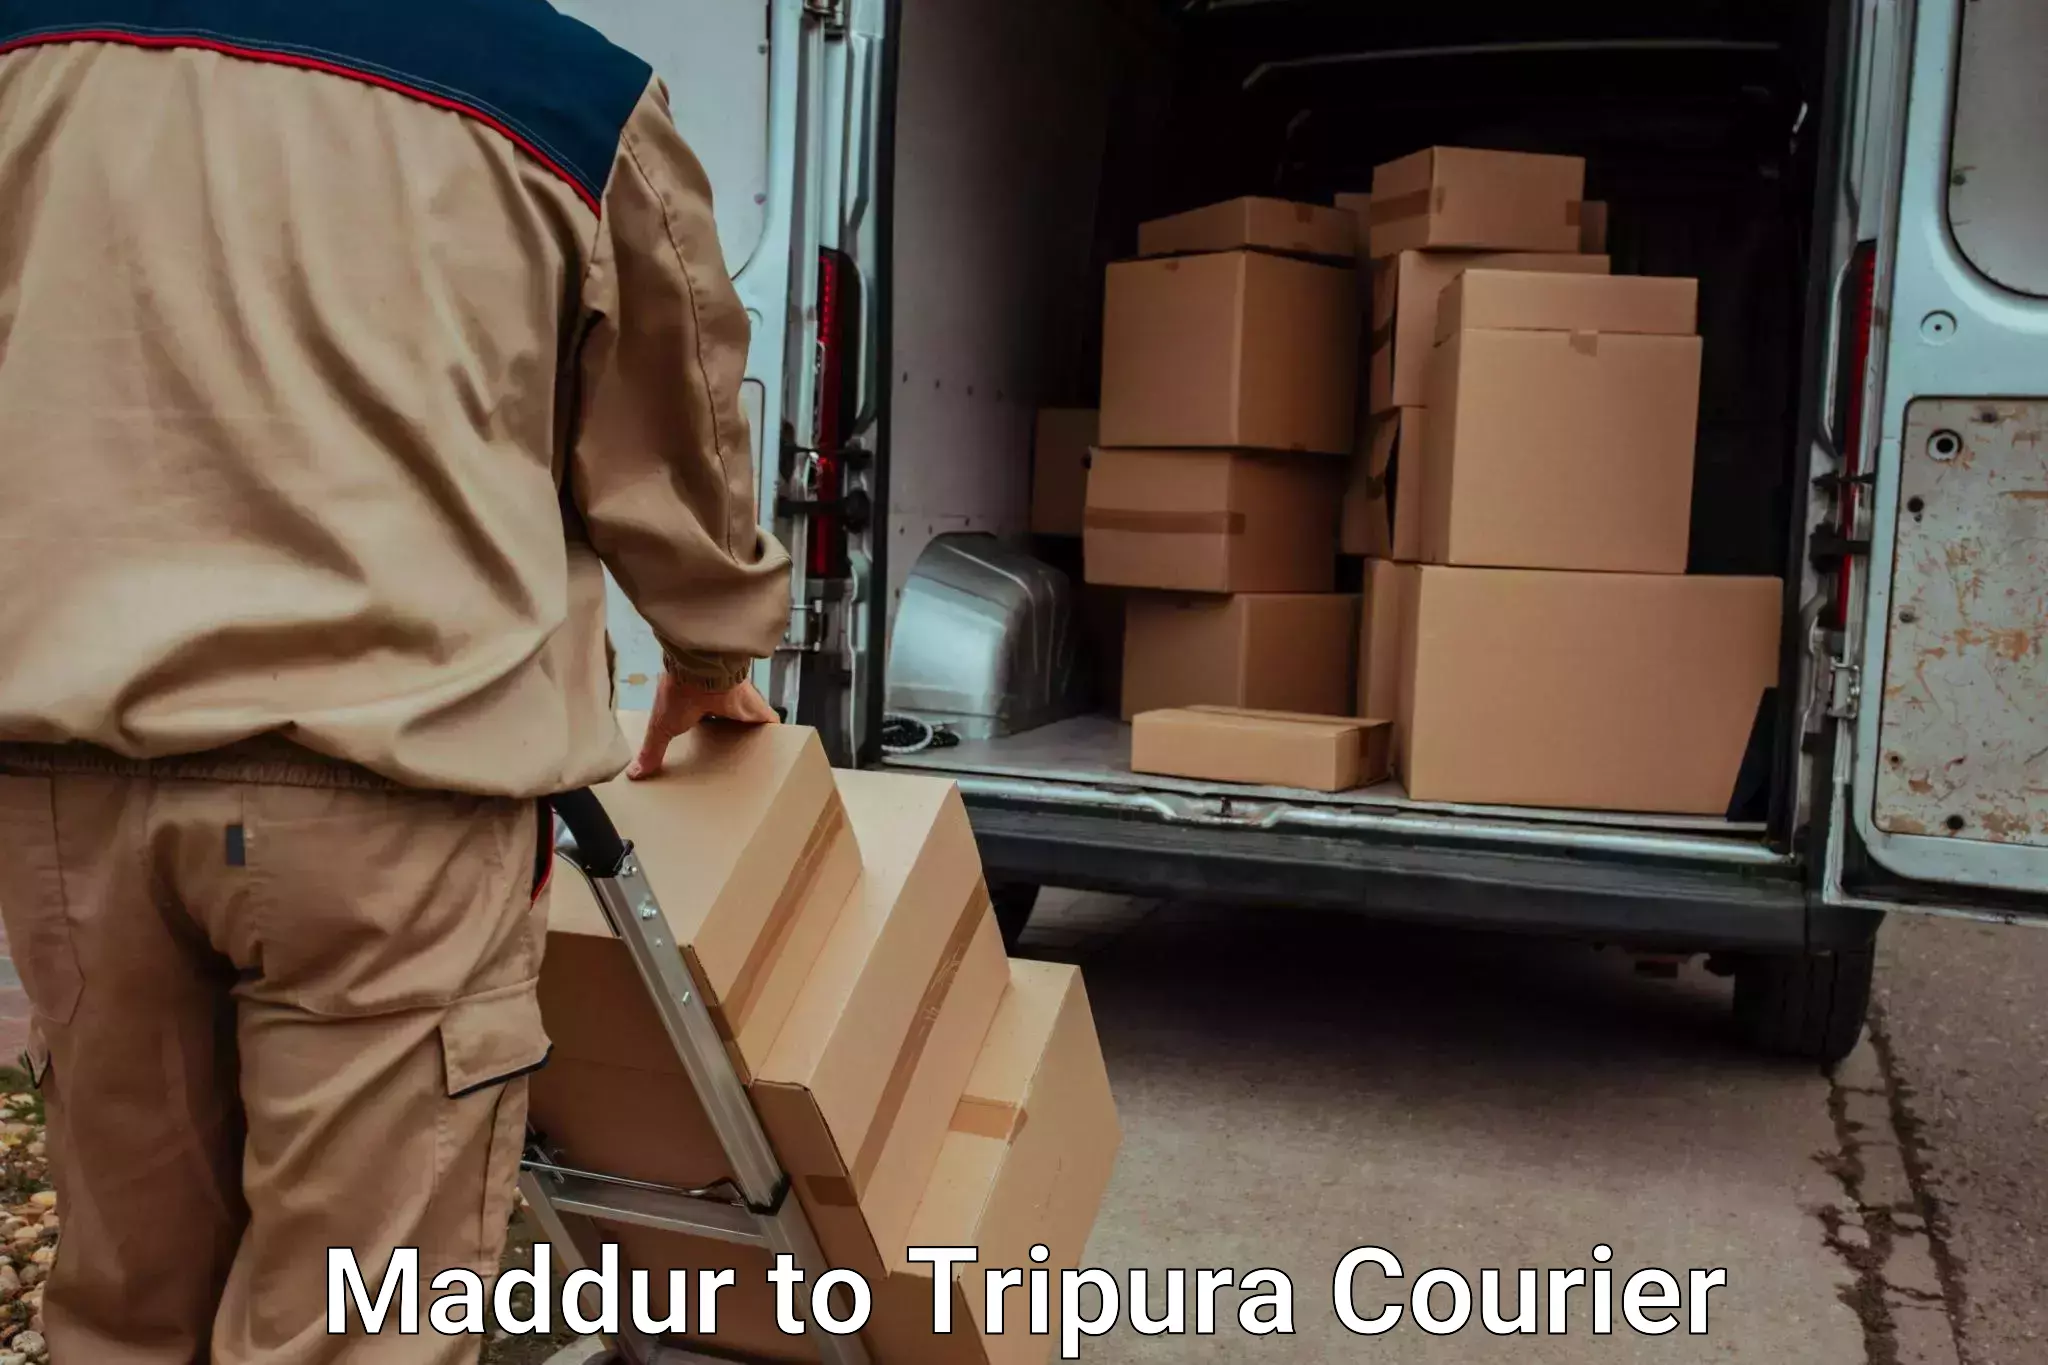 Luggage transport consulting Maddur to Tripura